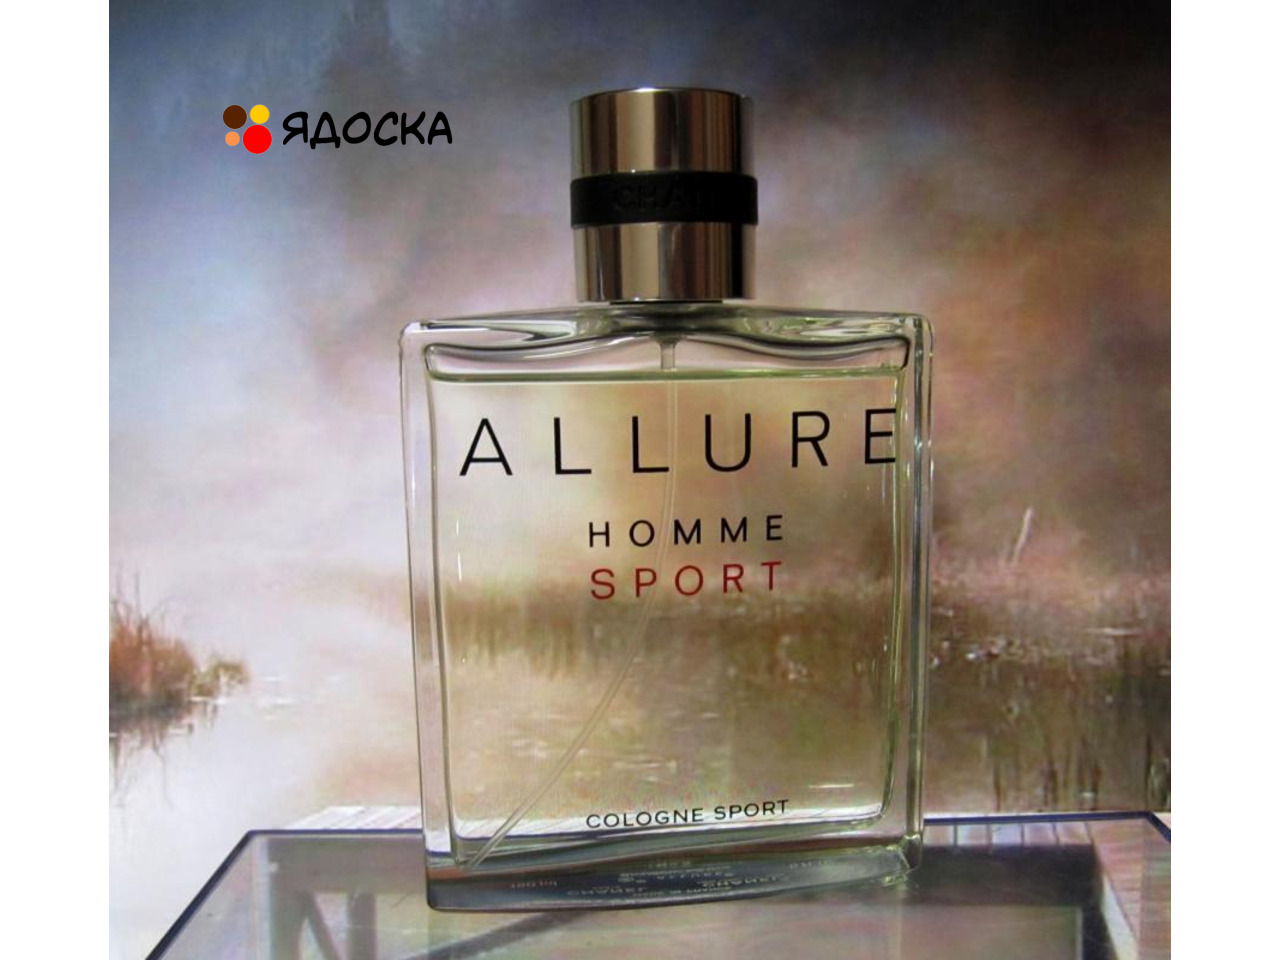 Allure homme sport оригинал. Chanel Allure homme Sport Cologne. Chanel homme Sport Cologne. Chanel Allure Sport Cologne EDC. Chanel Allure homme Cologne 100 ml.